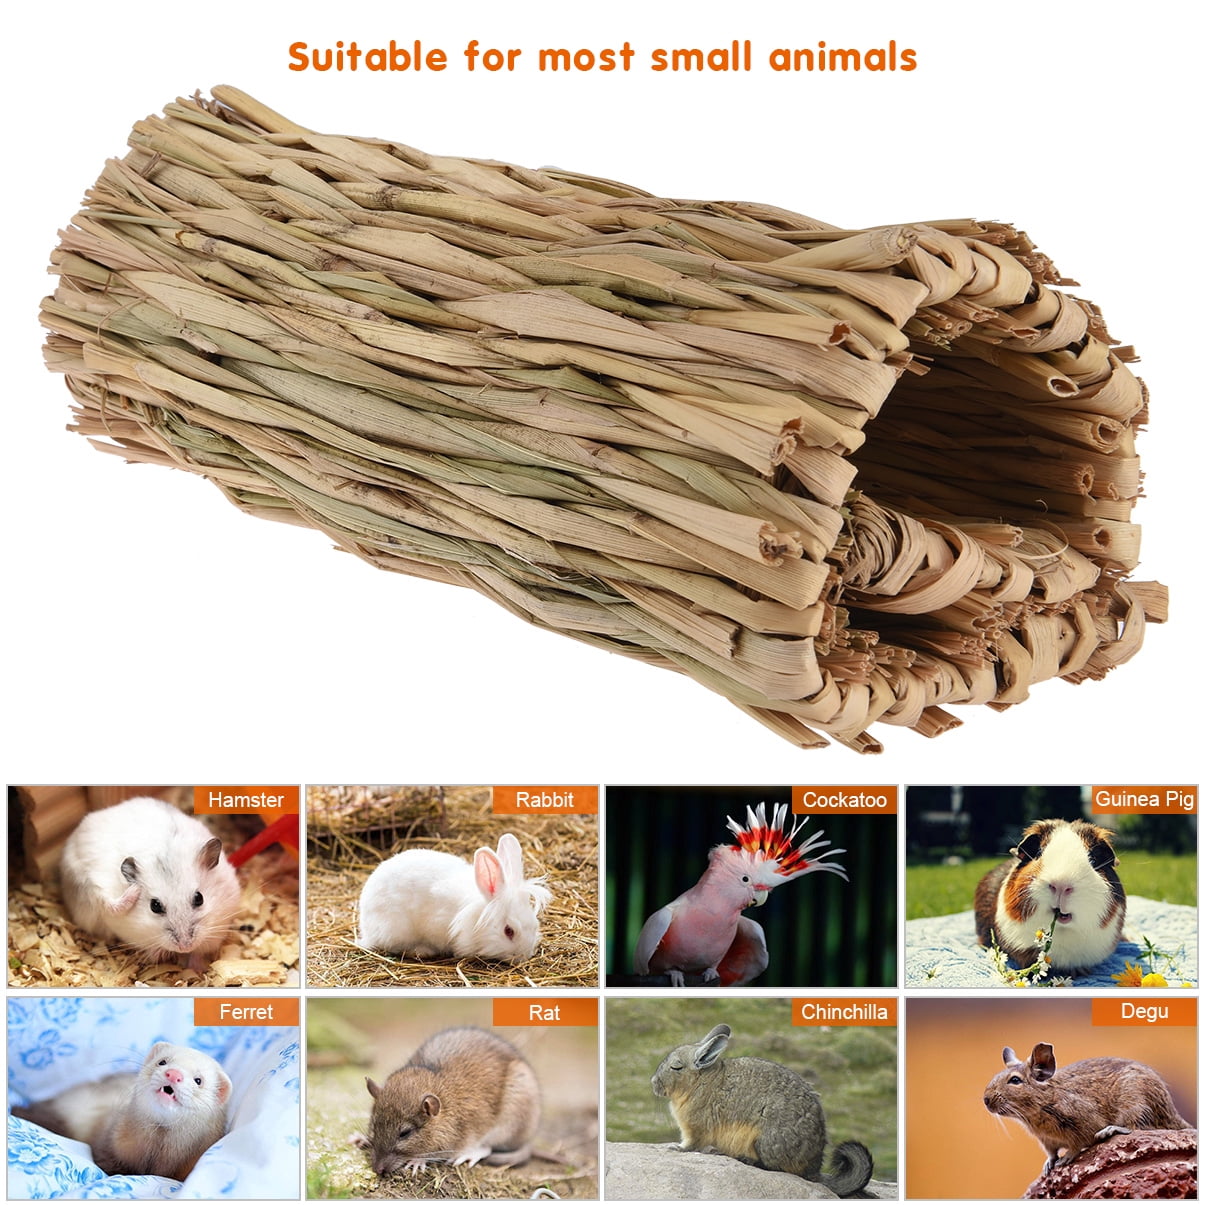 2pcs Grass Hamster Bed Woven Small Animal Mat Safe Pet Chew Toy For Hamster Rabbit Hedgehog And Guinea Pig 16 X11 Walmart Com Walmart Com,How Long To Cook Meatloaf